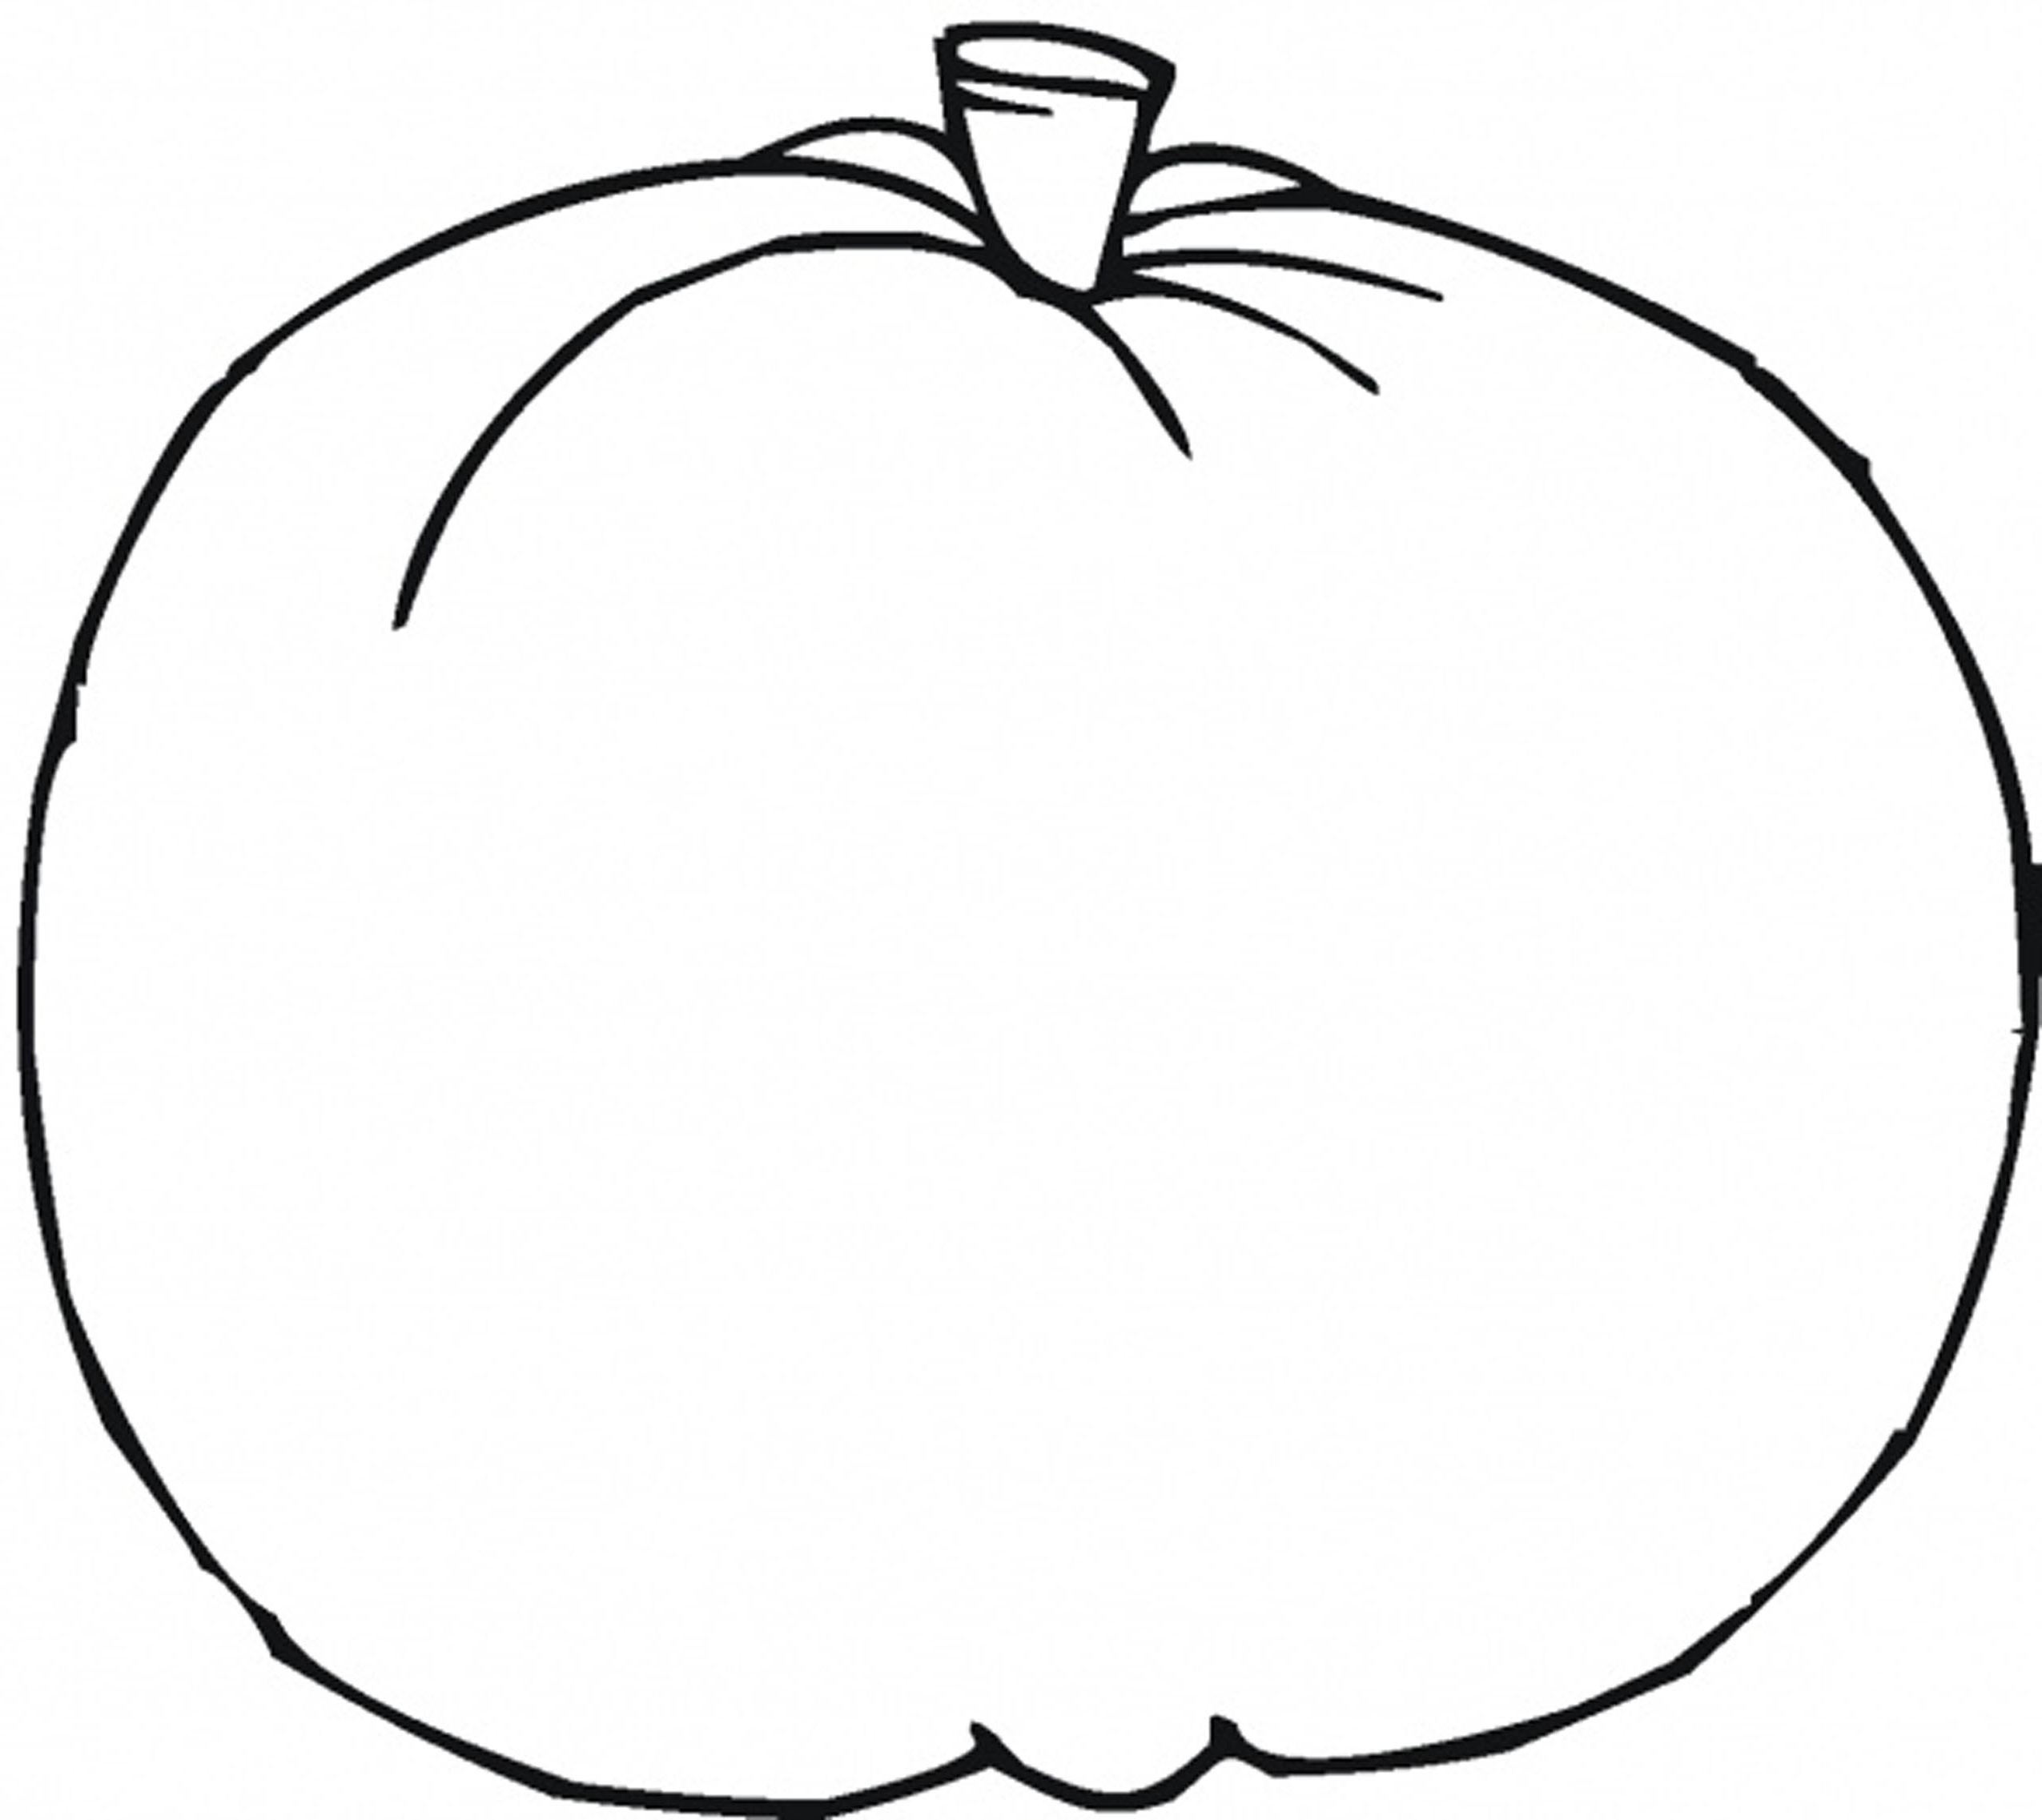 drawing-pumpkin-166834-objects-printable-coloring-pages